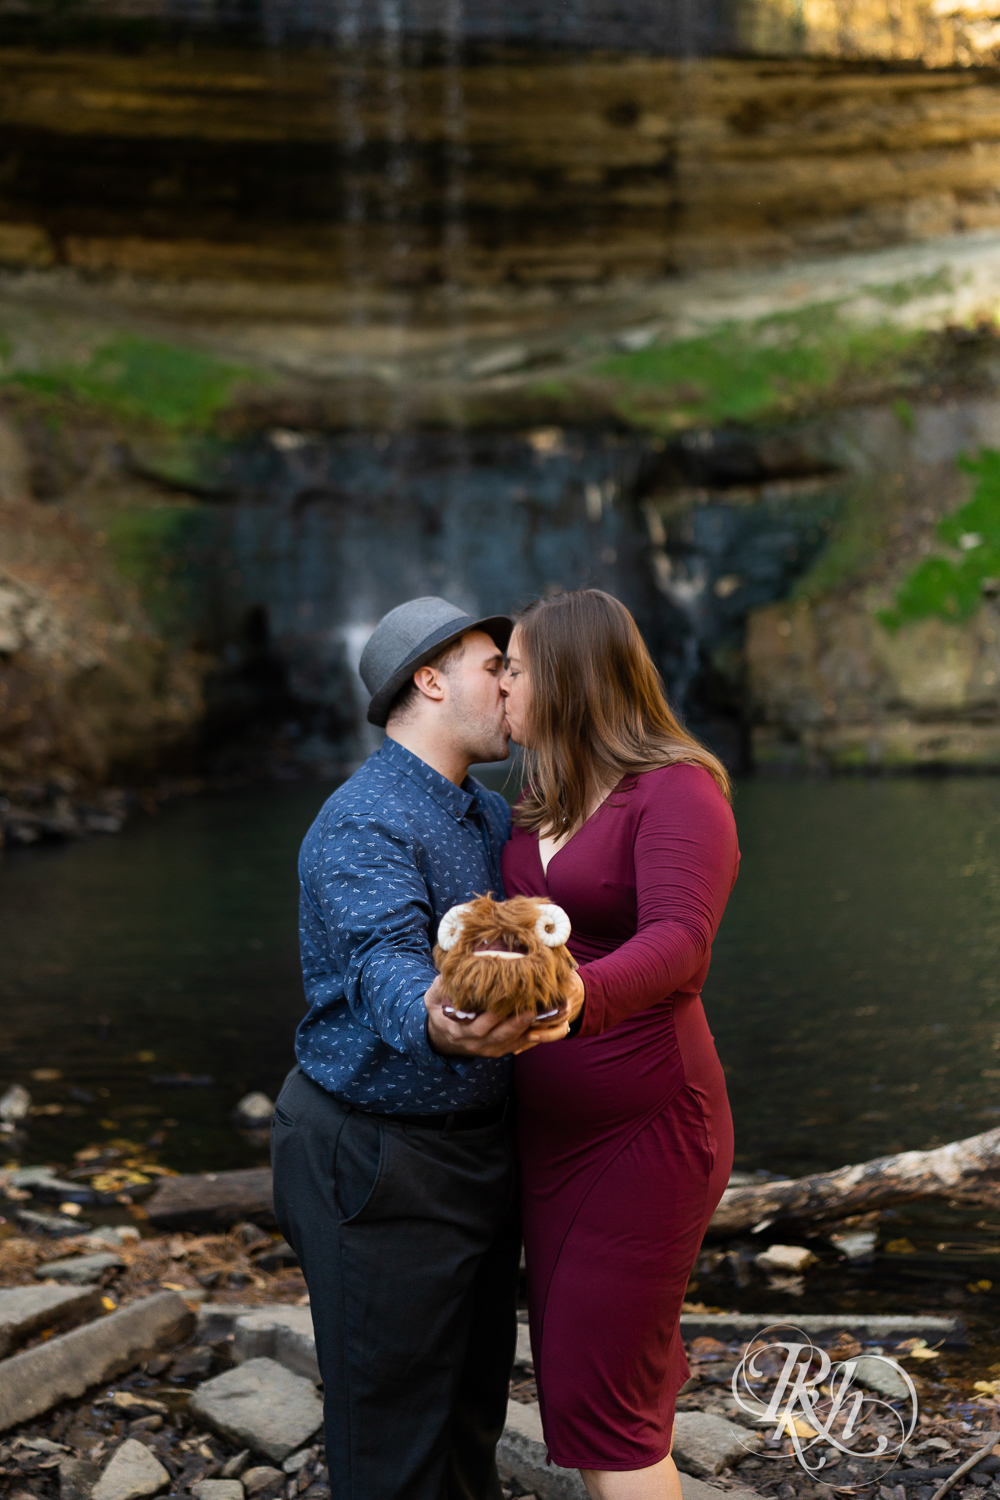 Man wearing hat kisses woman in red dress in Minnehaha Falls in Minneapolis, Minnesota, while holding stuffed Bantha.